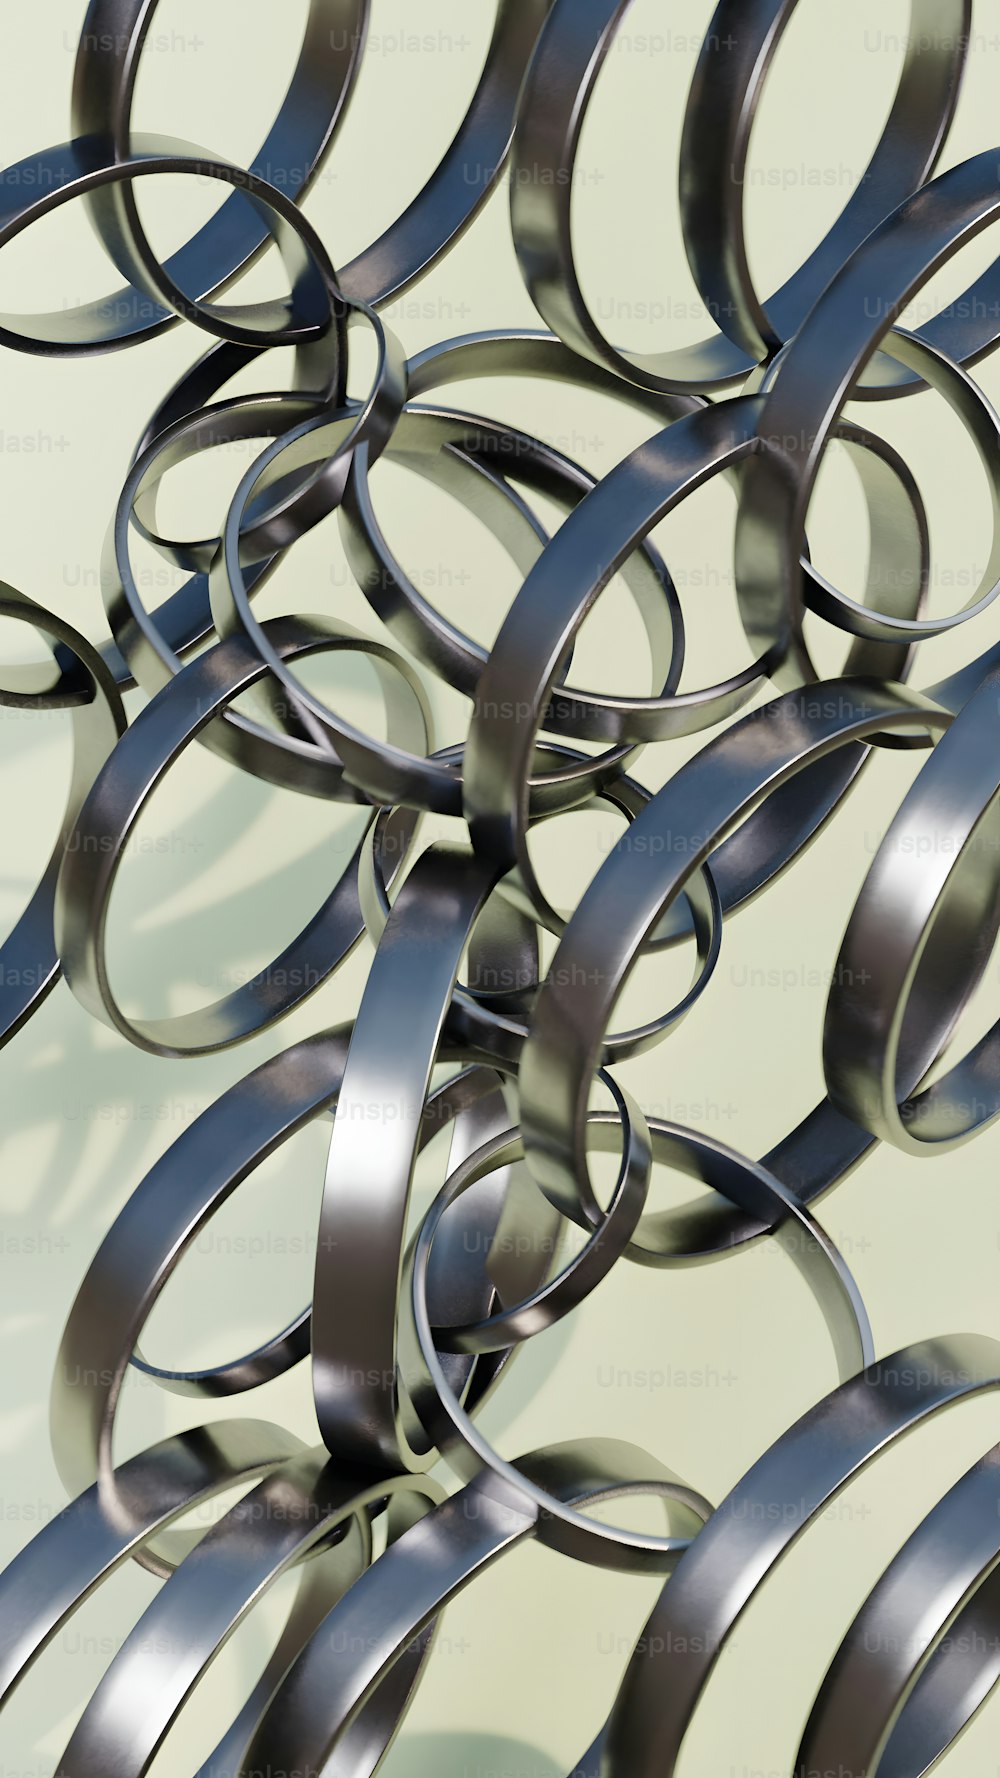 a group of metal rings on a white surface